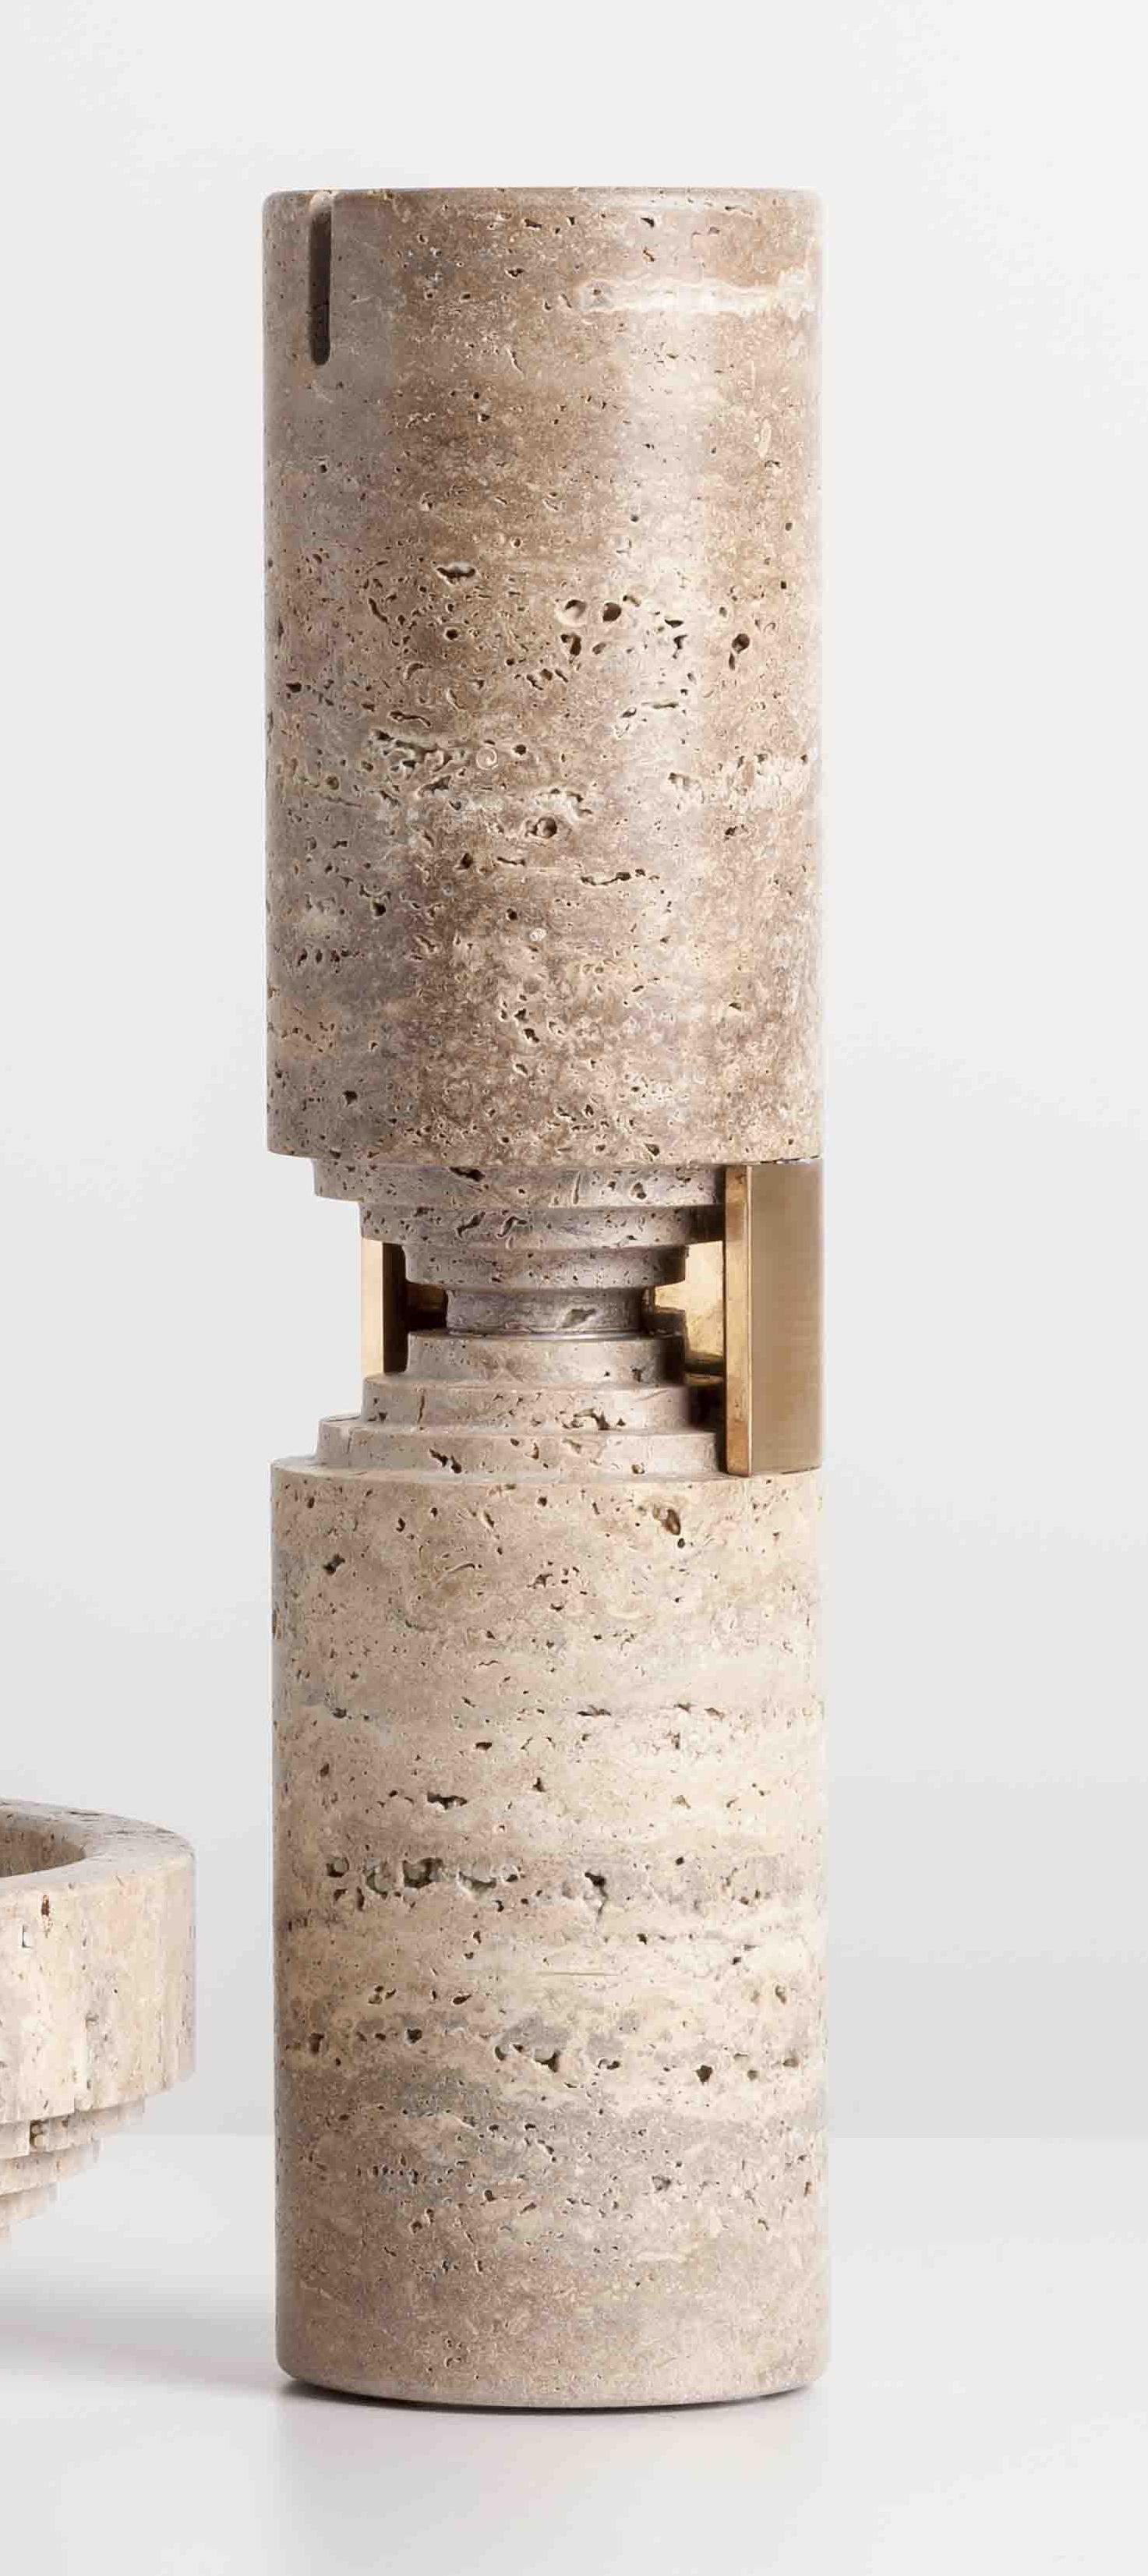 Travertine Trieste Big Vase by Andrea Bonini
Limited Edition
Dimensions: Ø 10 x H 40 cm.
Materials: Travertine and natural brass.

Made in Italy. Limited series, numbered and signed pieces. Custom size or finish on request. Different marble options